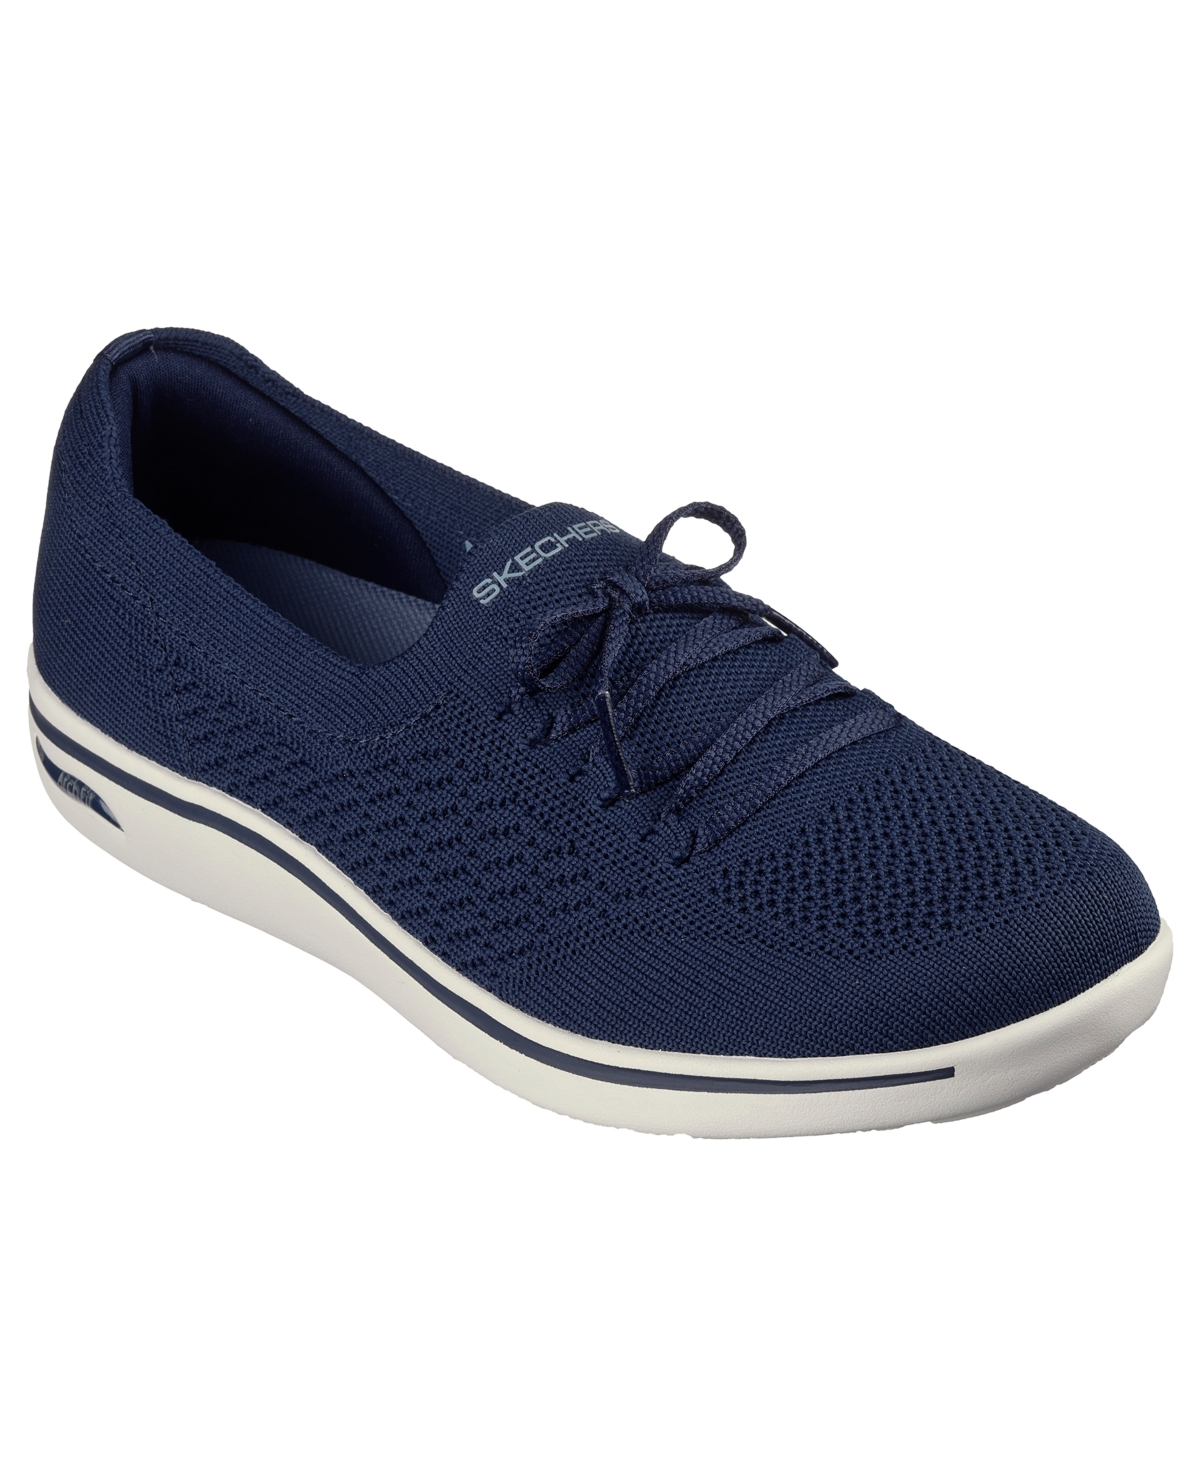 Women's Arch Fit Uplift-Florence Casual Sneakers from Finish Line - Navy, White